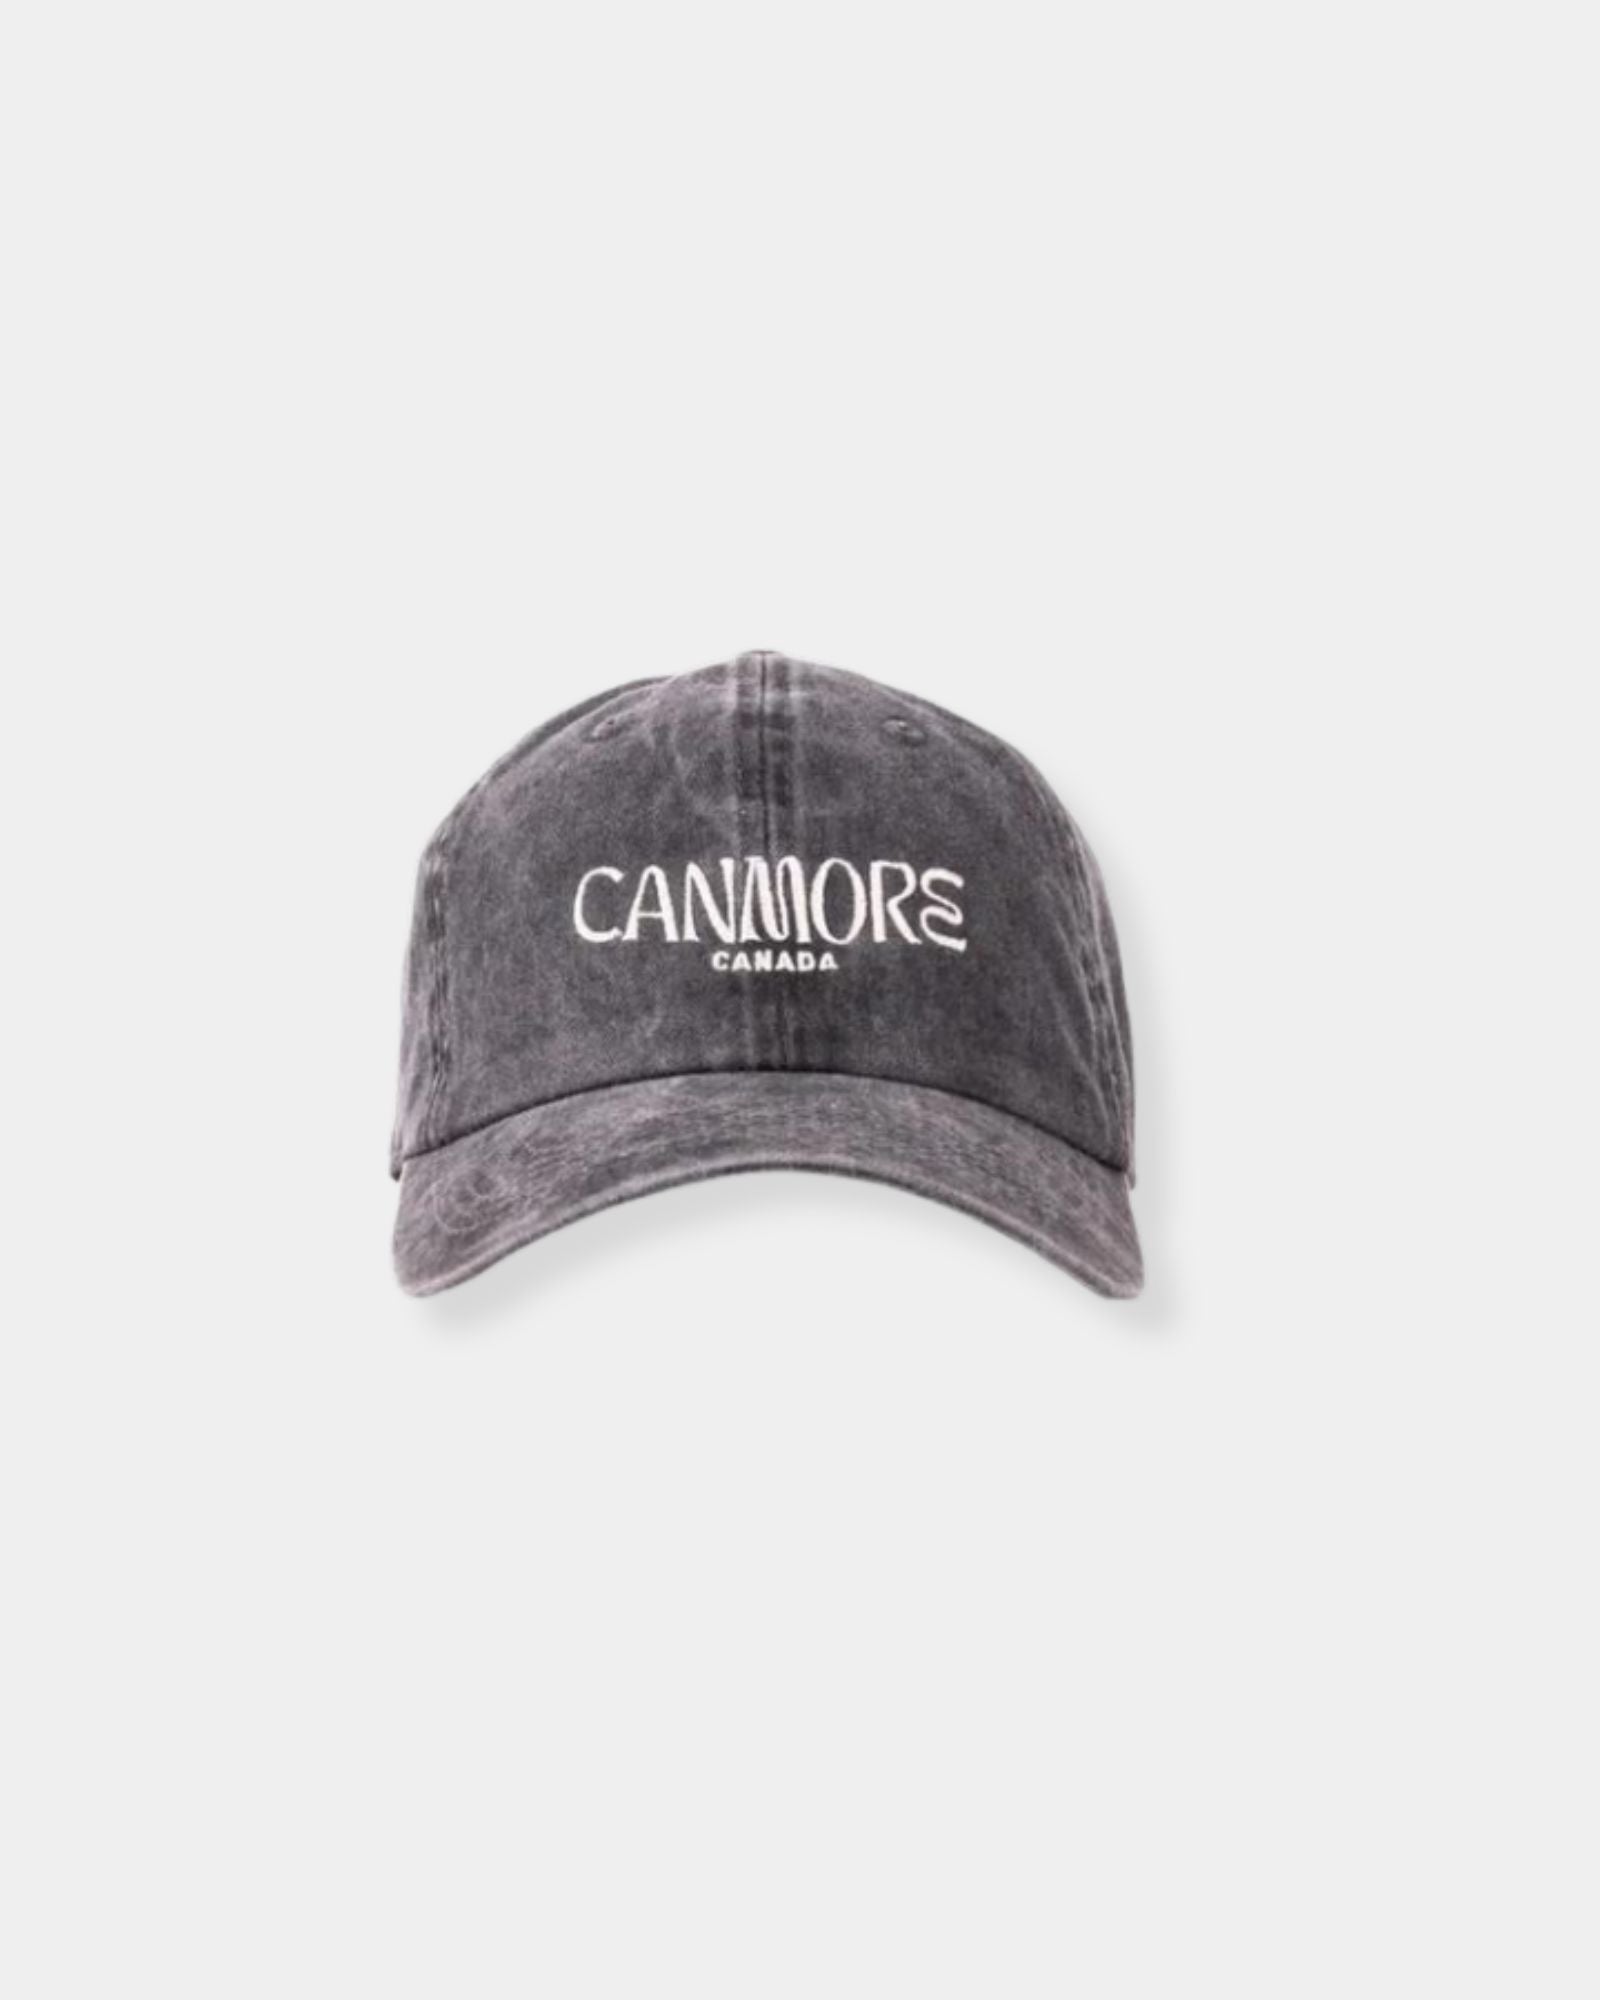 THE HAT - CANMORE BLACK